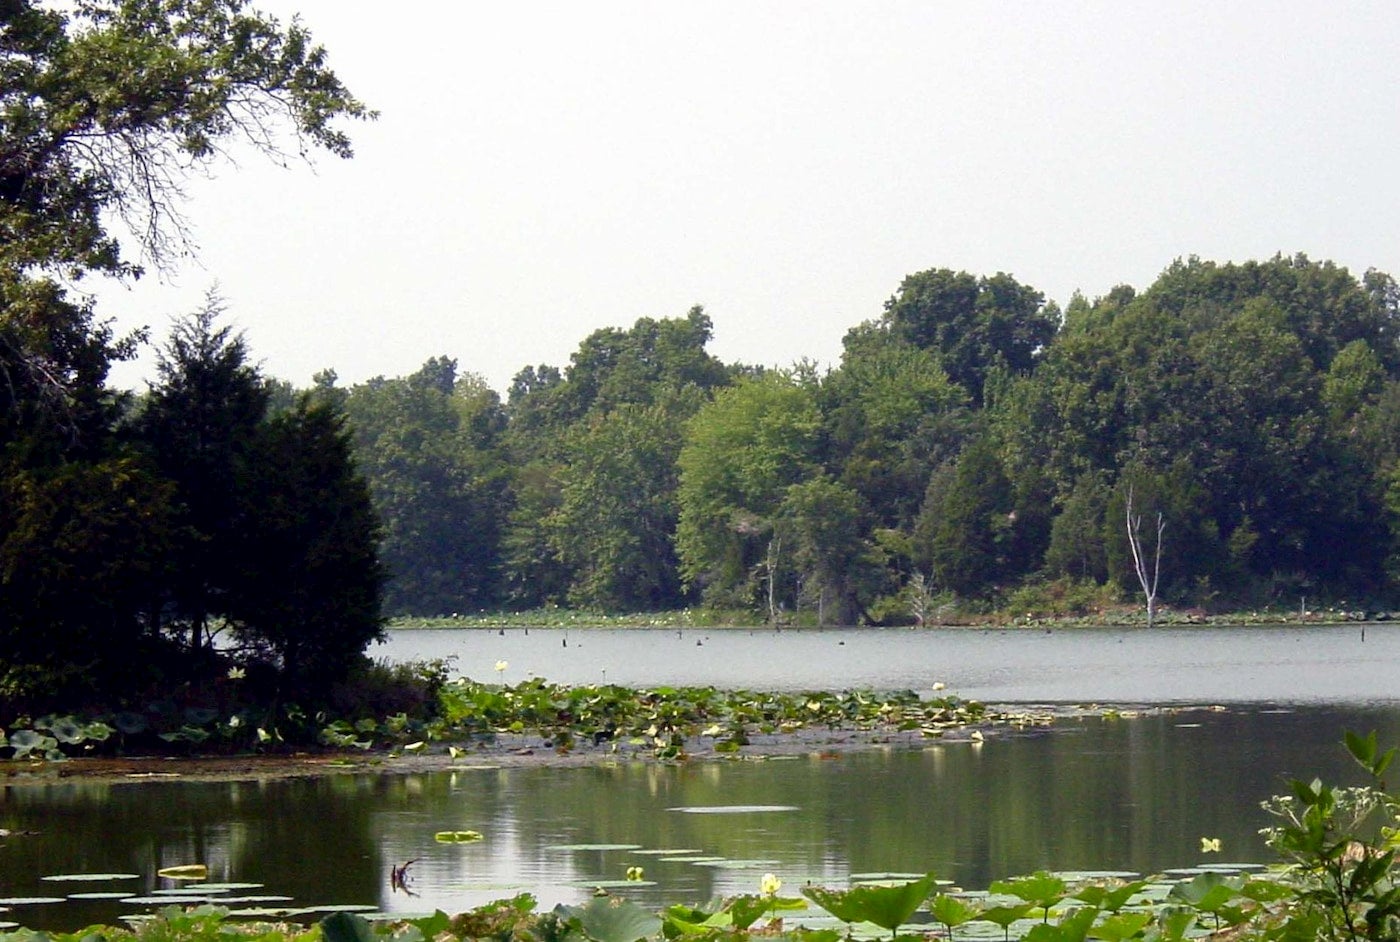 Crab Orchard Lake surrounded by forest and dispersed with lily pads.